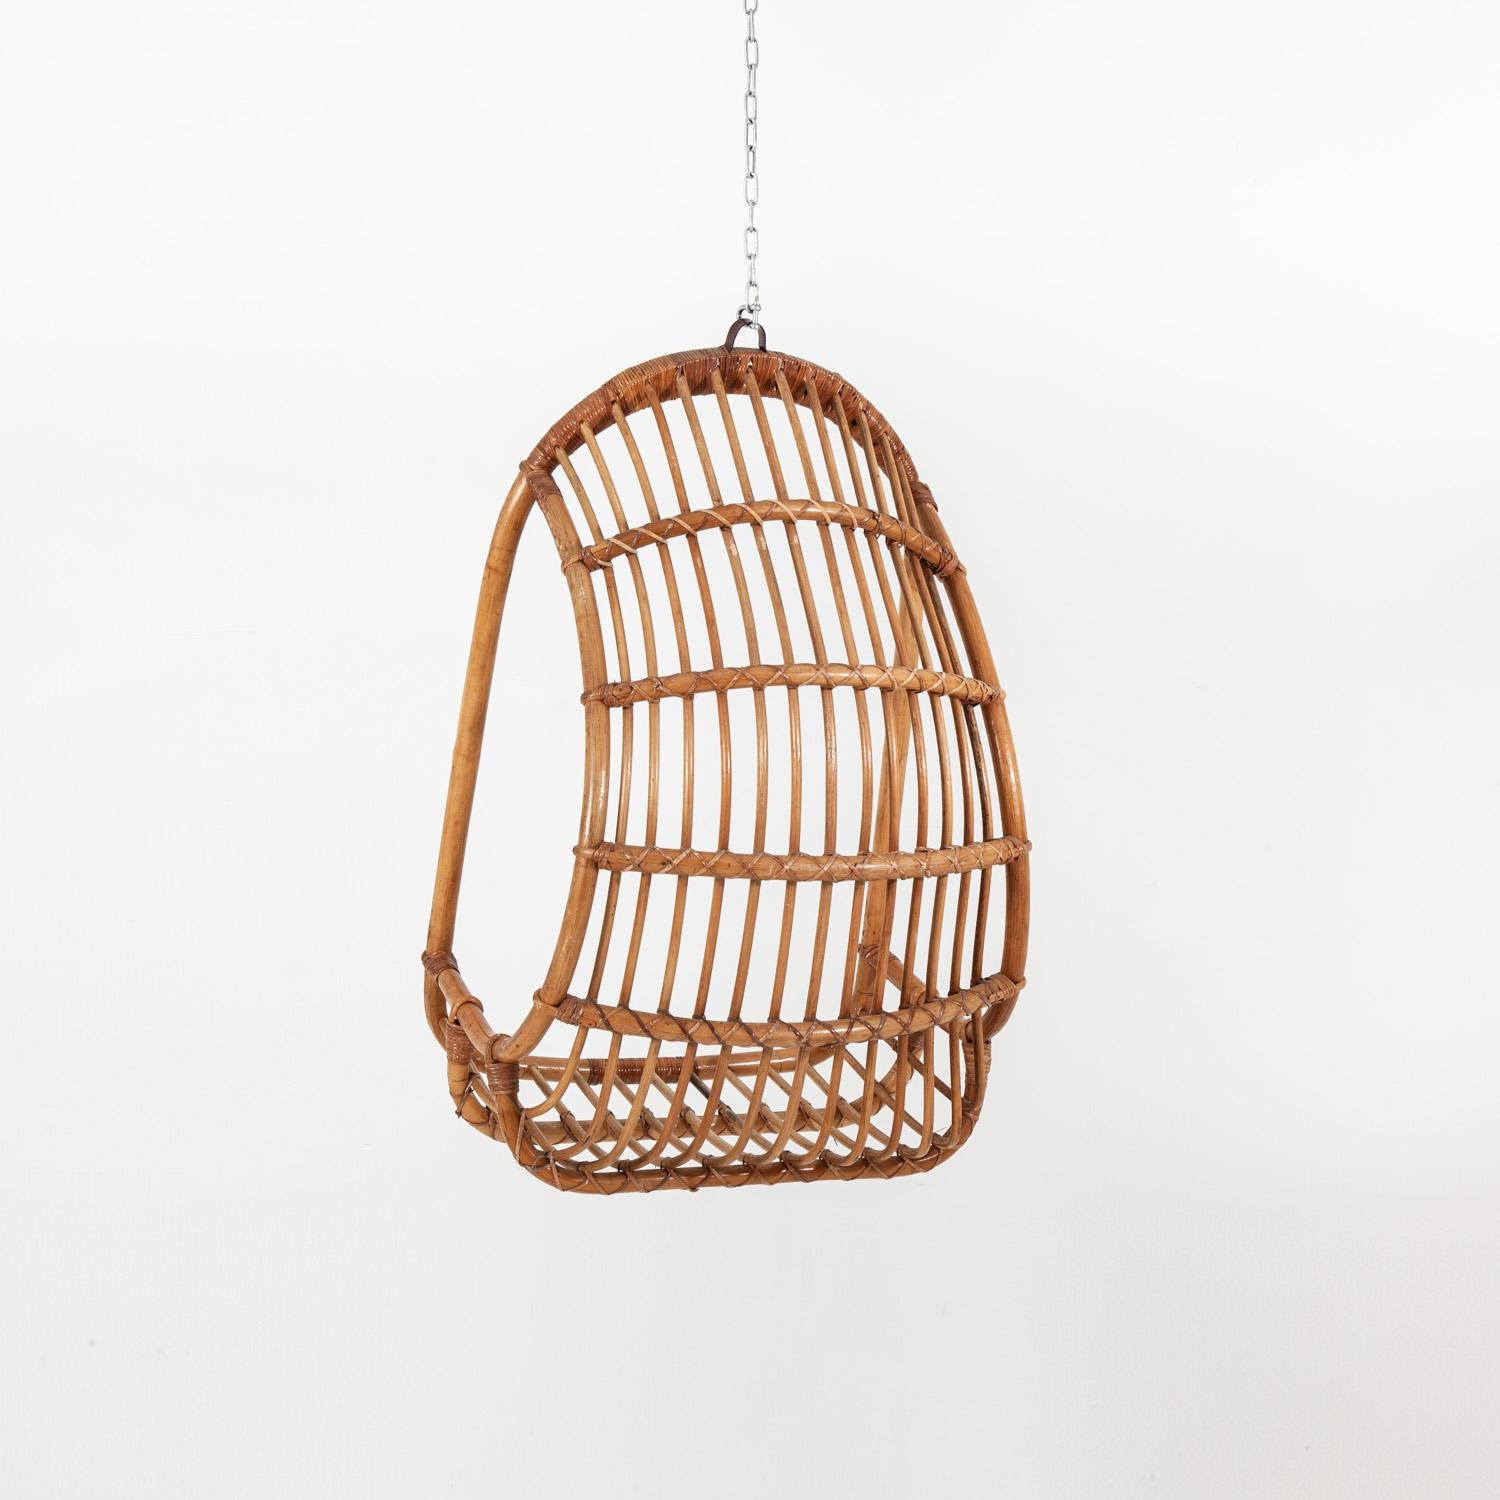 Stylish mid-20th century cane hanging chair.

Measures: Height 108cm x width 70cm x depth 70cm.